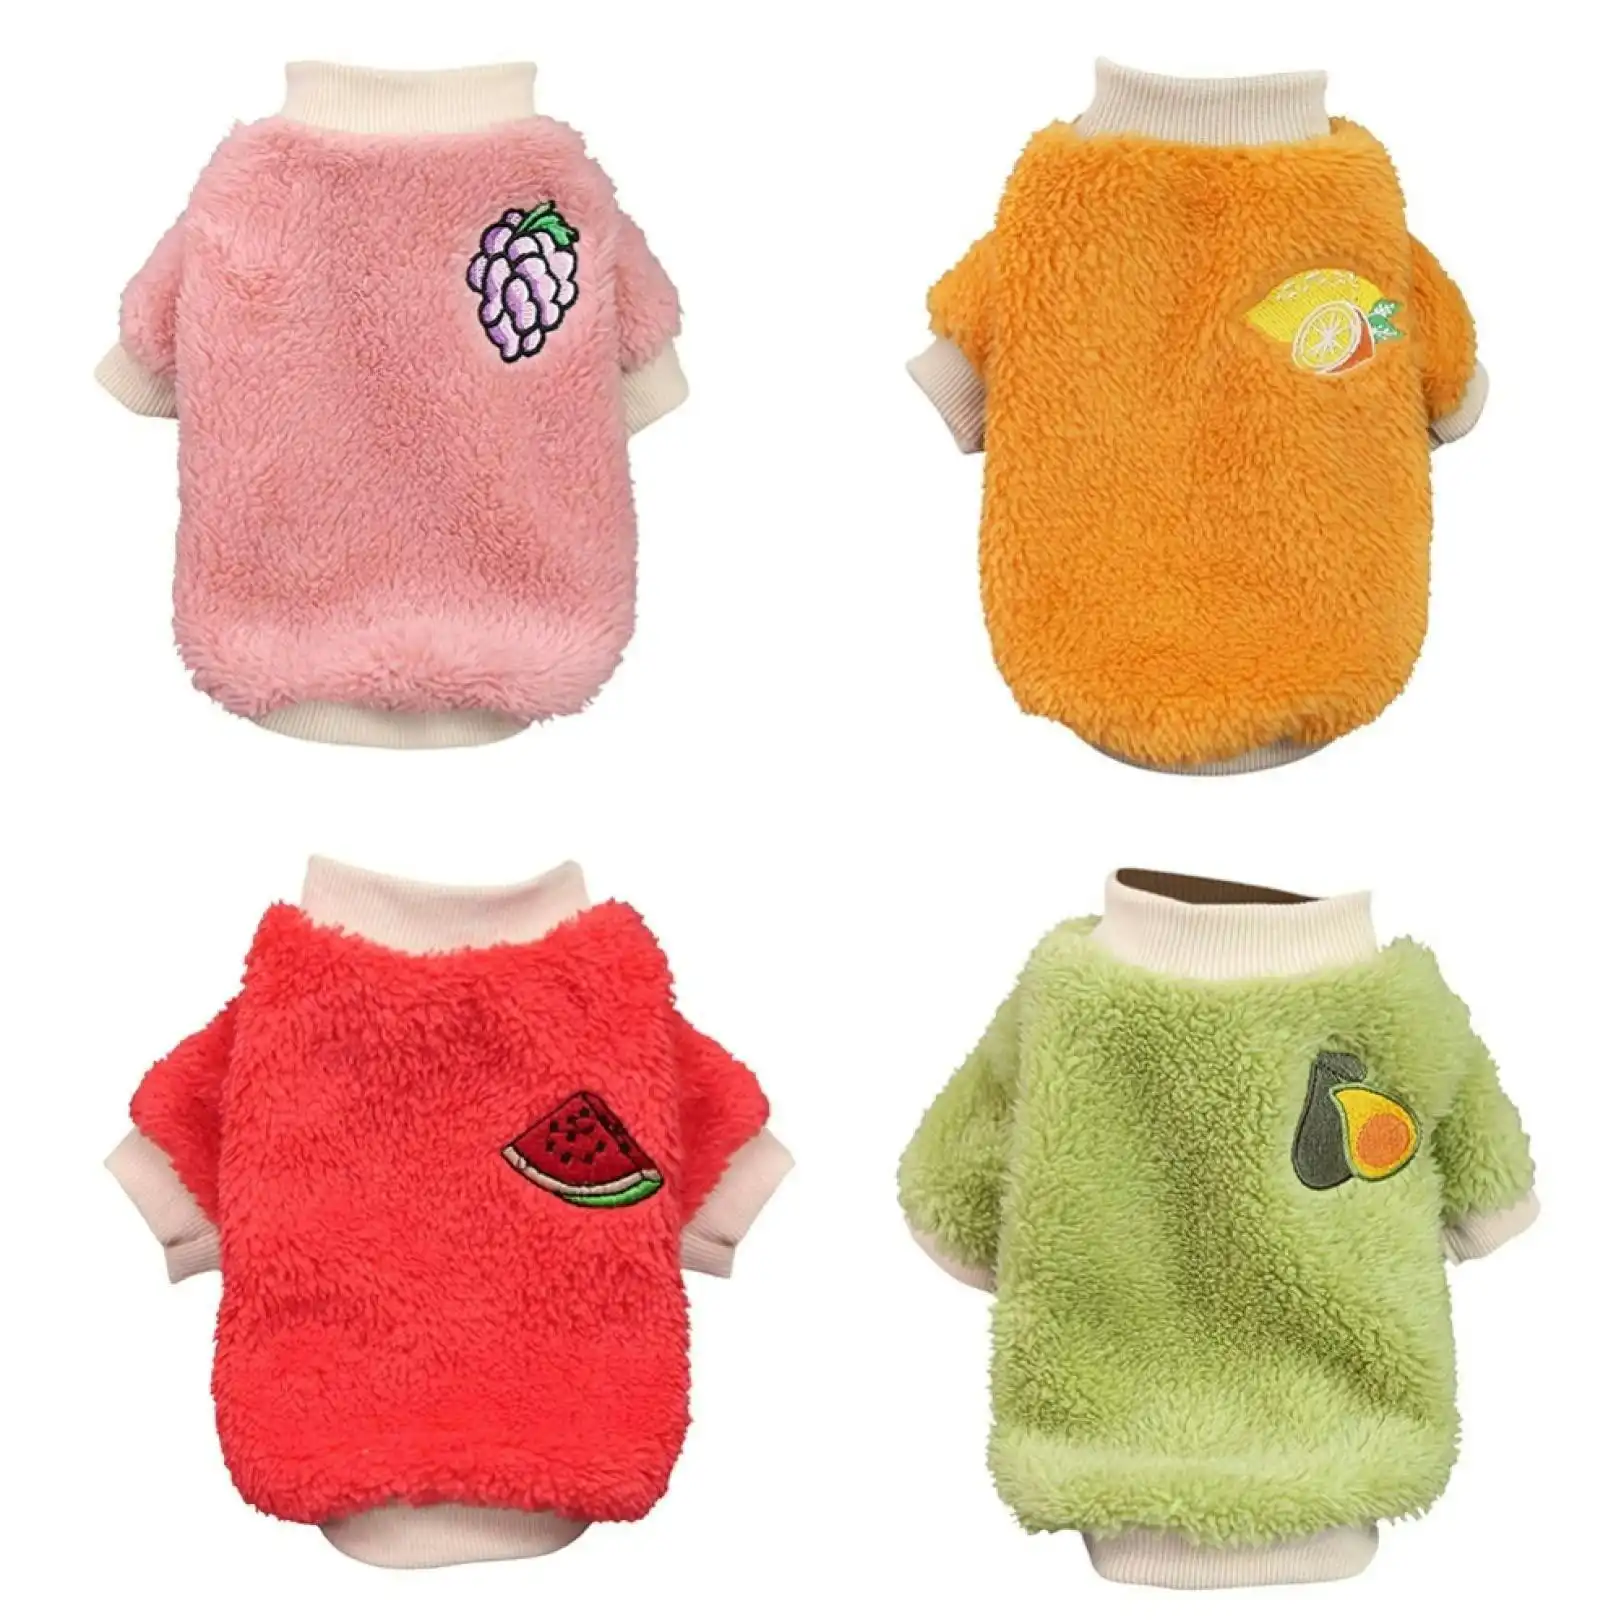 S Puppy Pet Dog Fleece Warm Jumper Sweater Coat Small Yorkie Chihuahua Cat Clothes